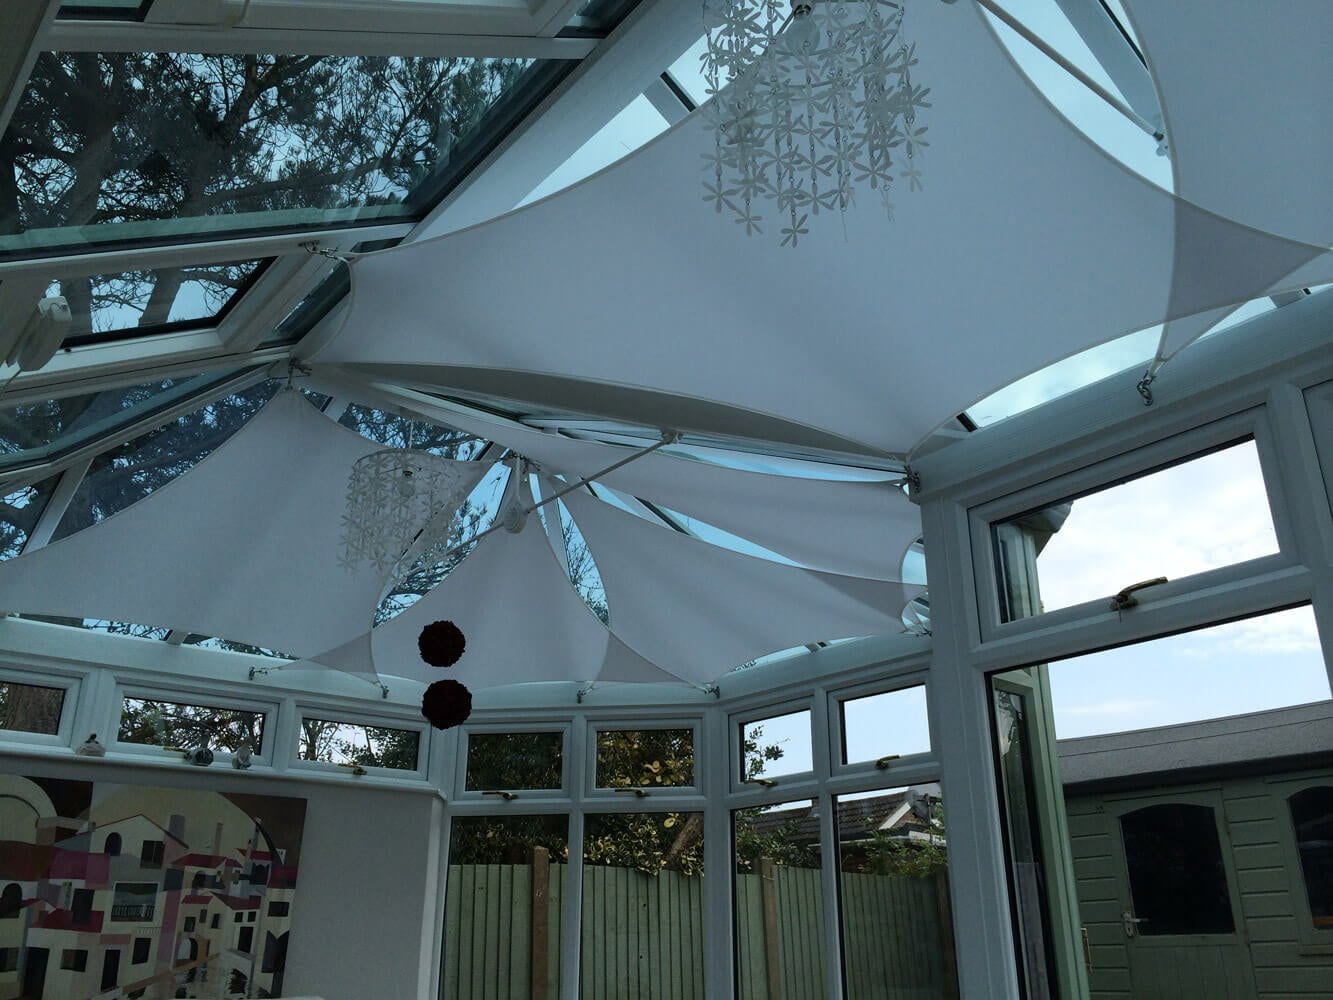 Shade Plus Conservatory Sail Blinds